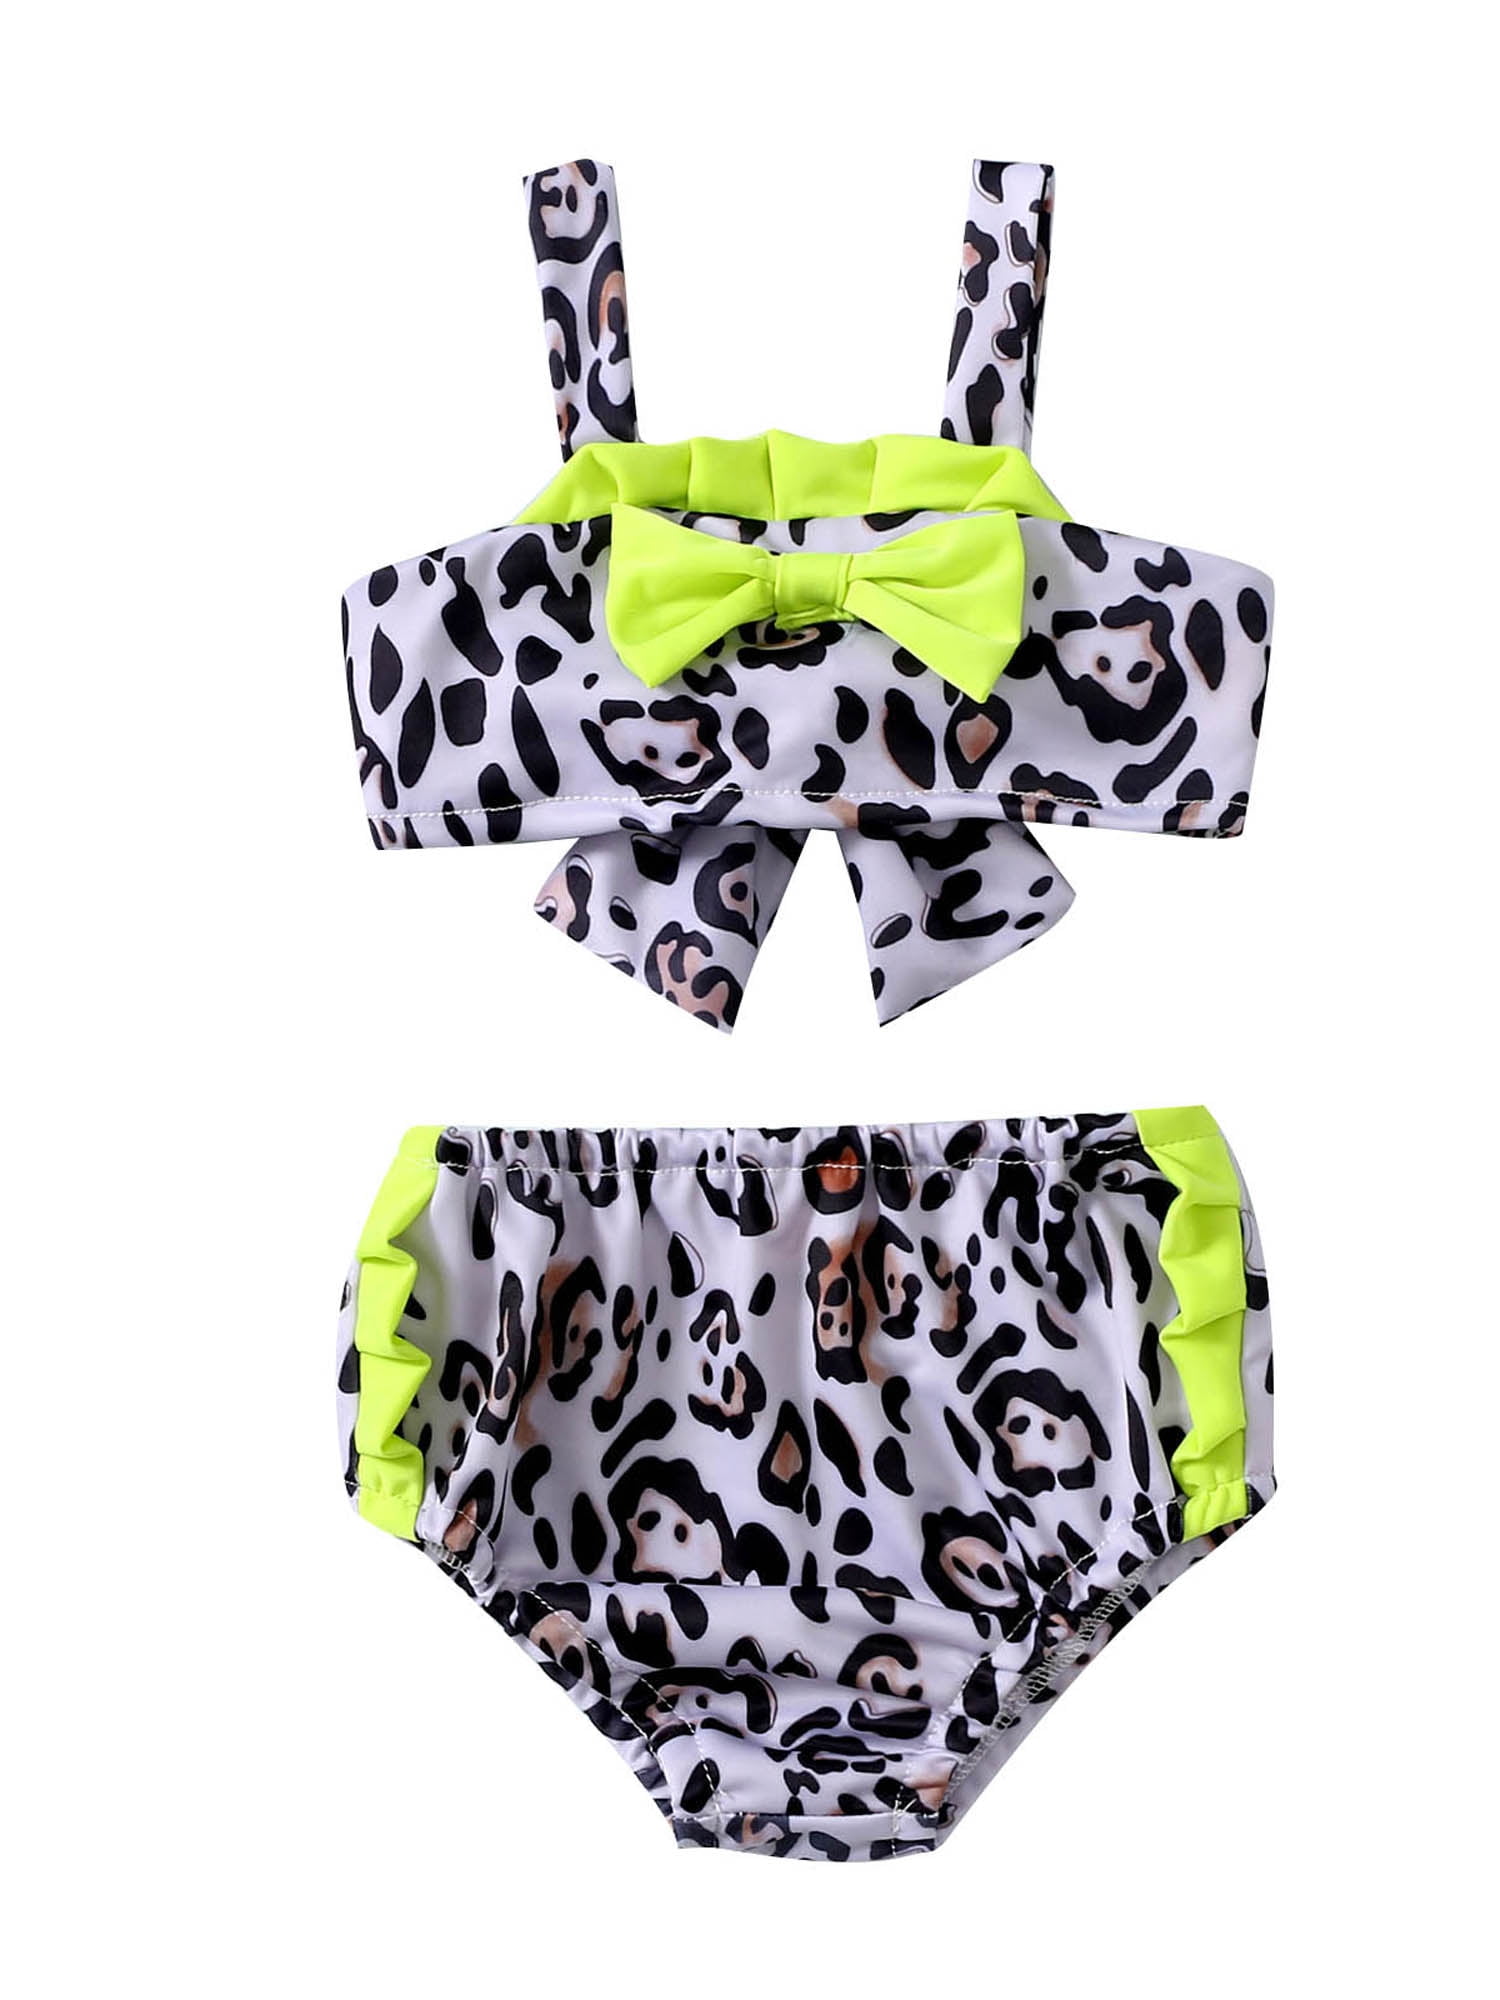 Baby Kids Girls Stripe Print Bowknot Halter Tow Piece Swimsuit High Waisted Bottom Bathing Suit 